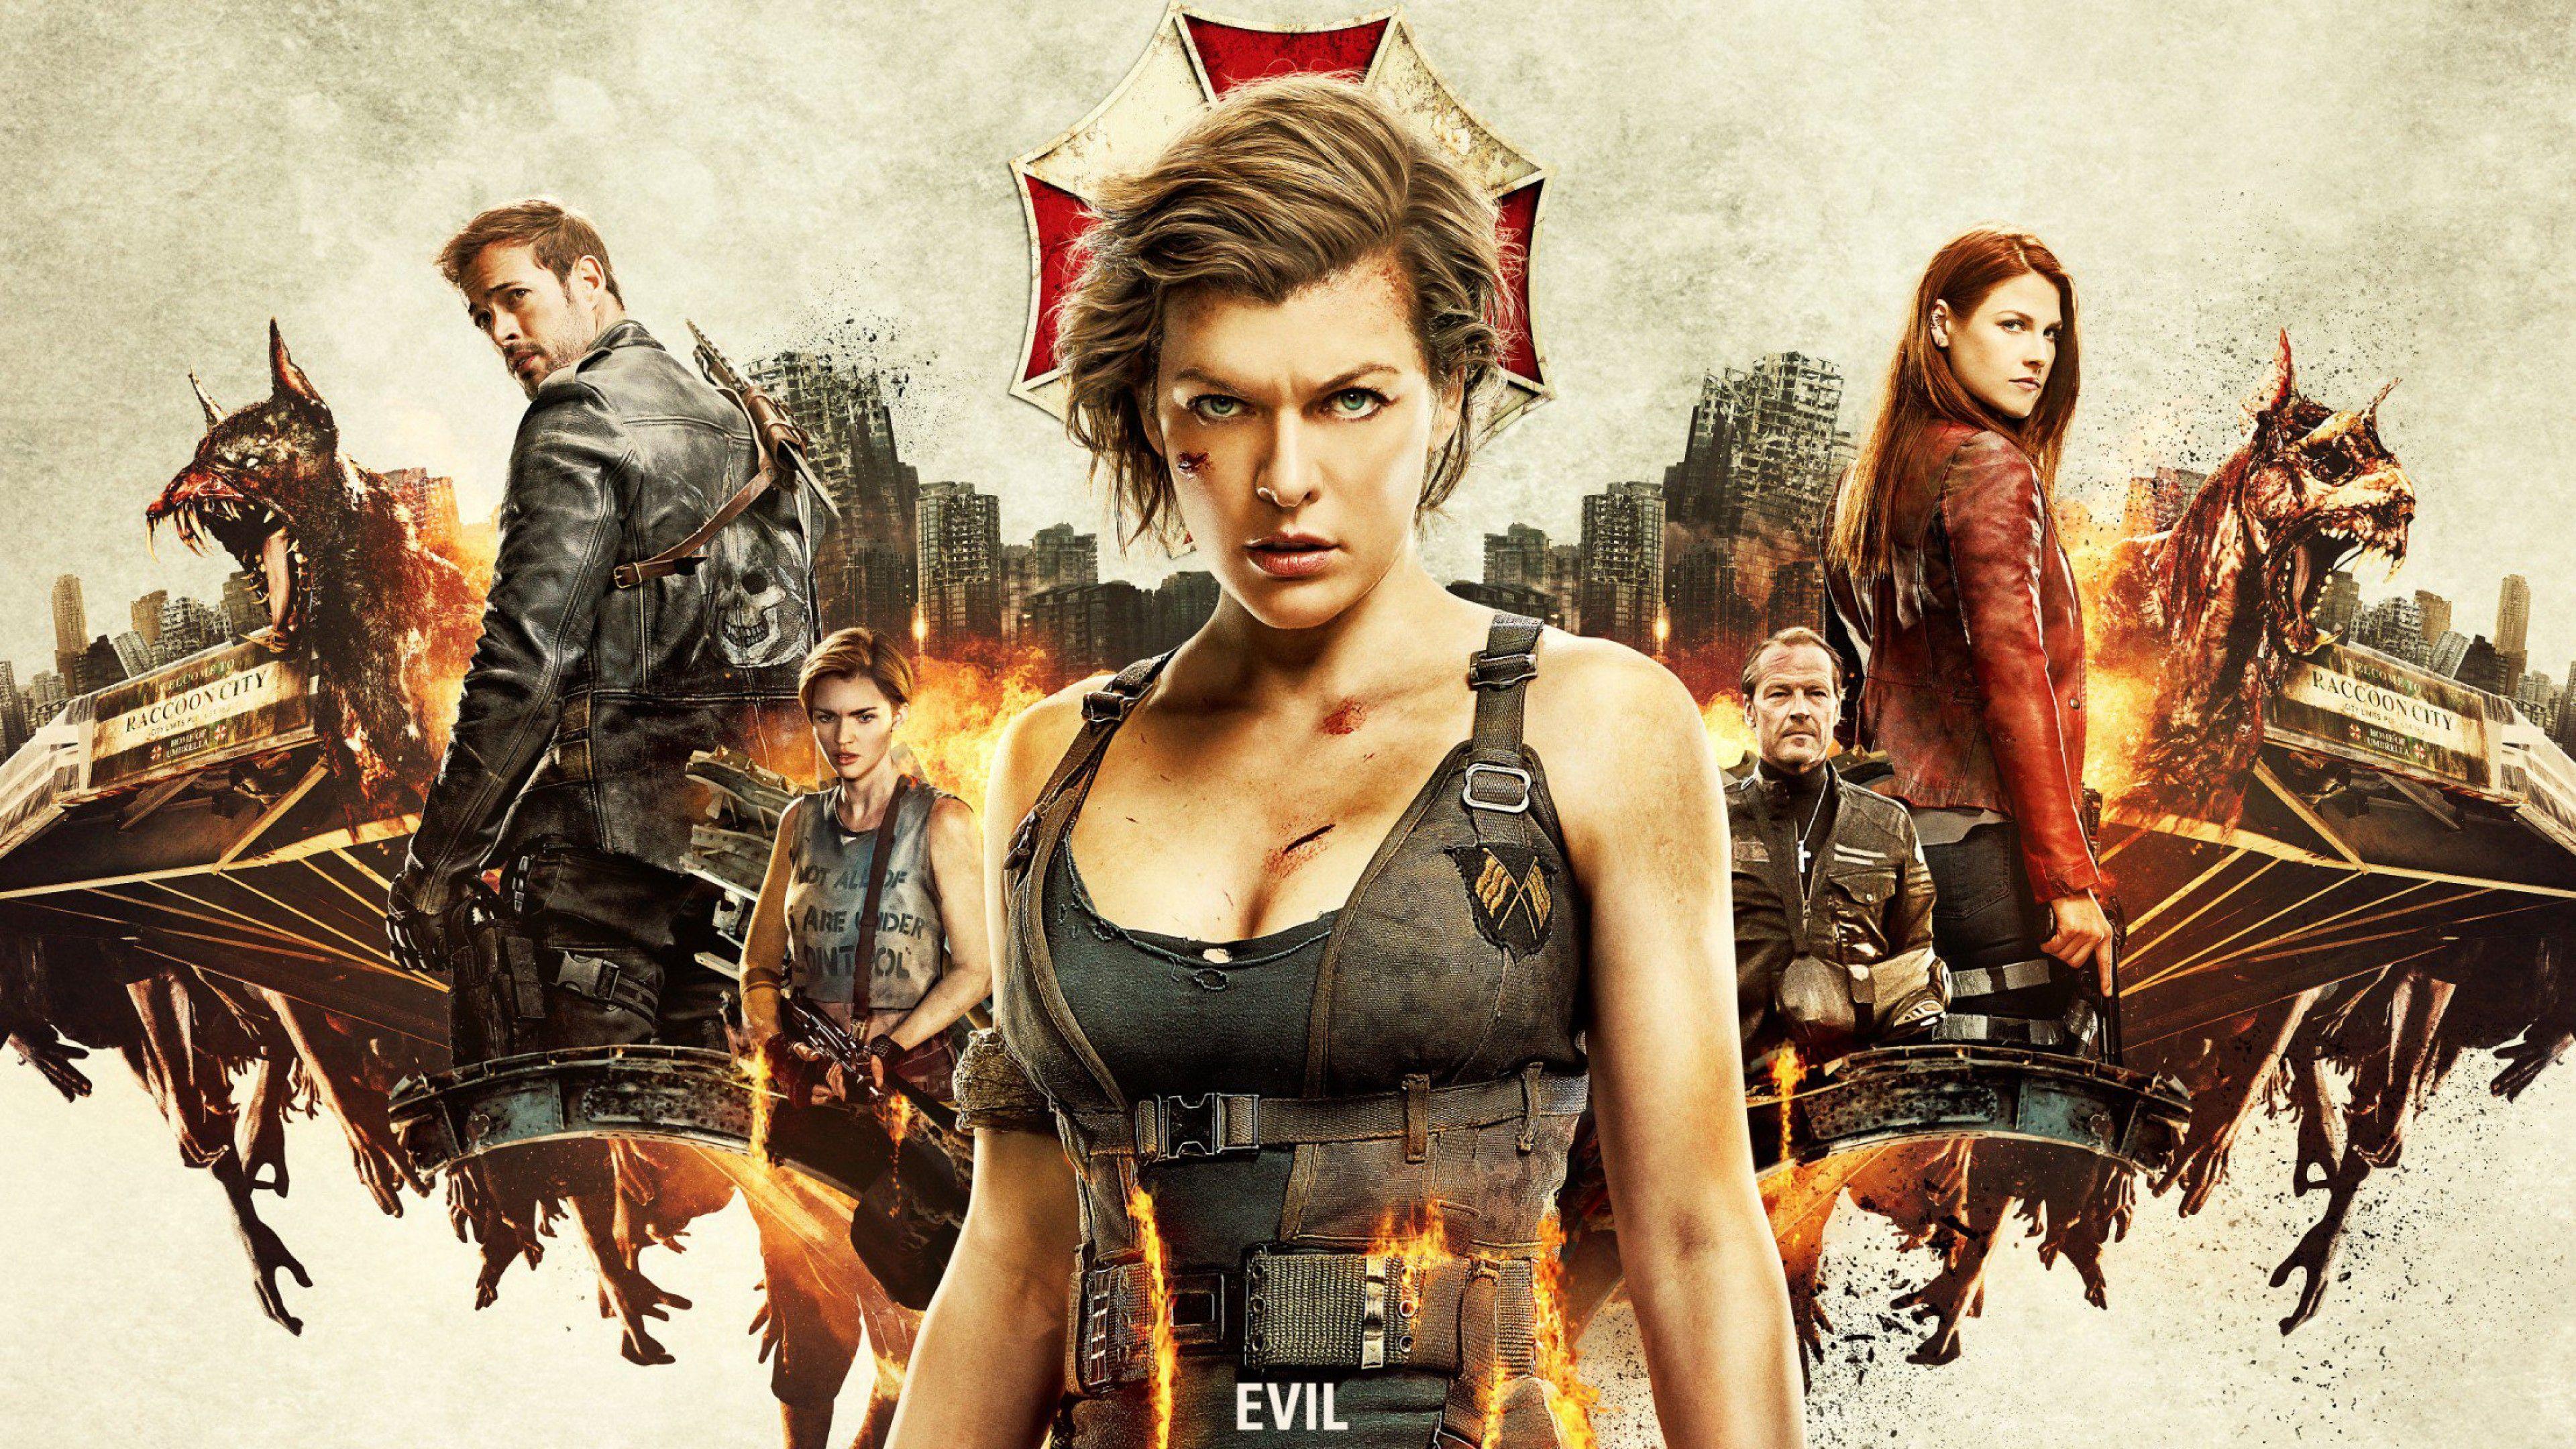 resident evil movie download hd